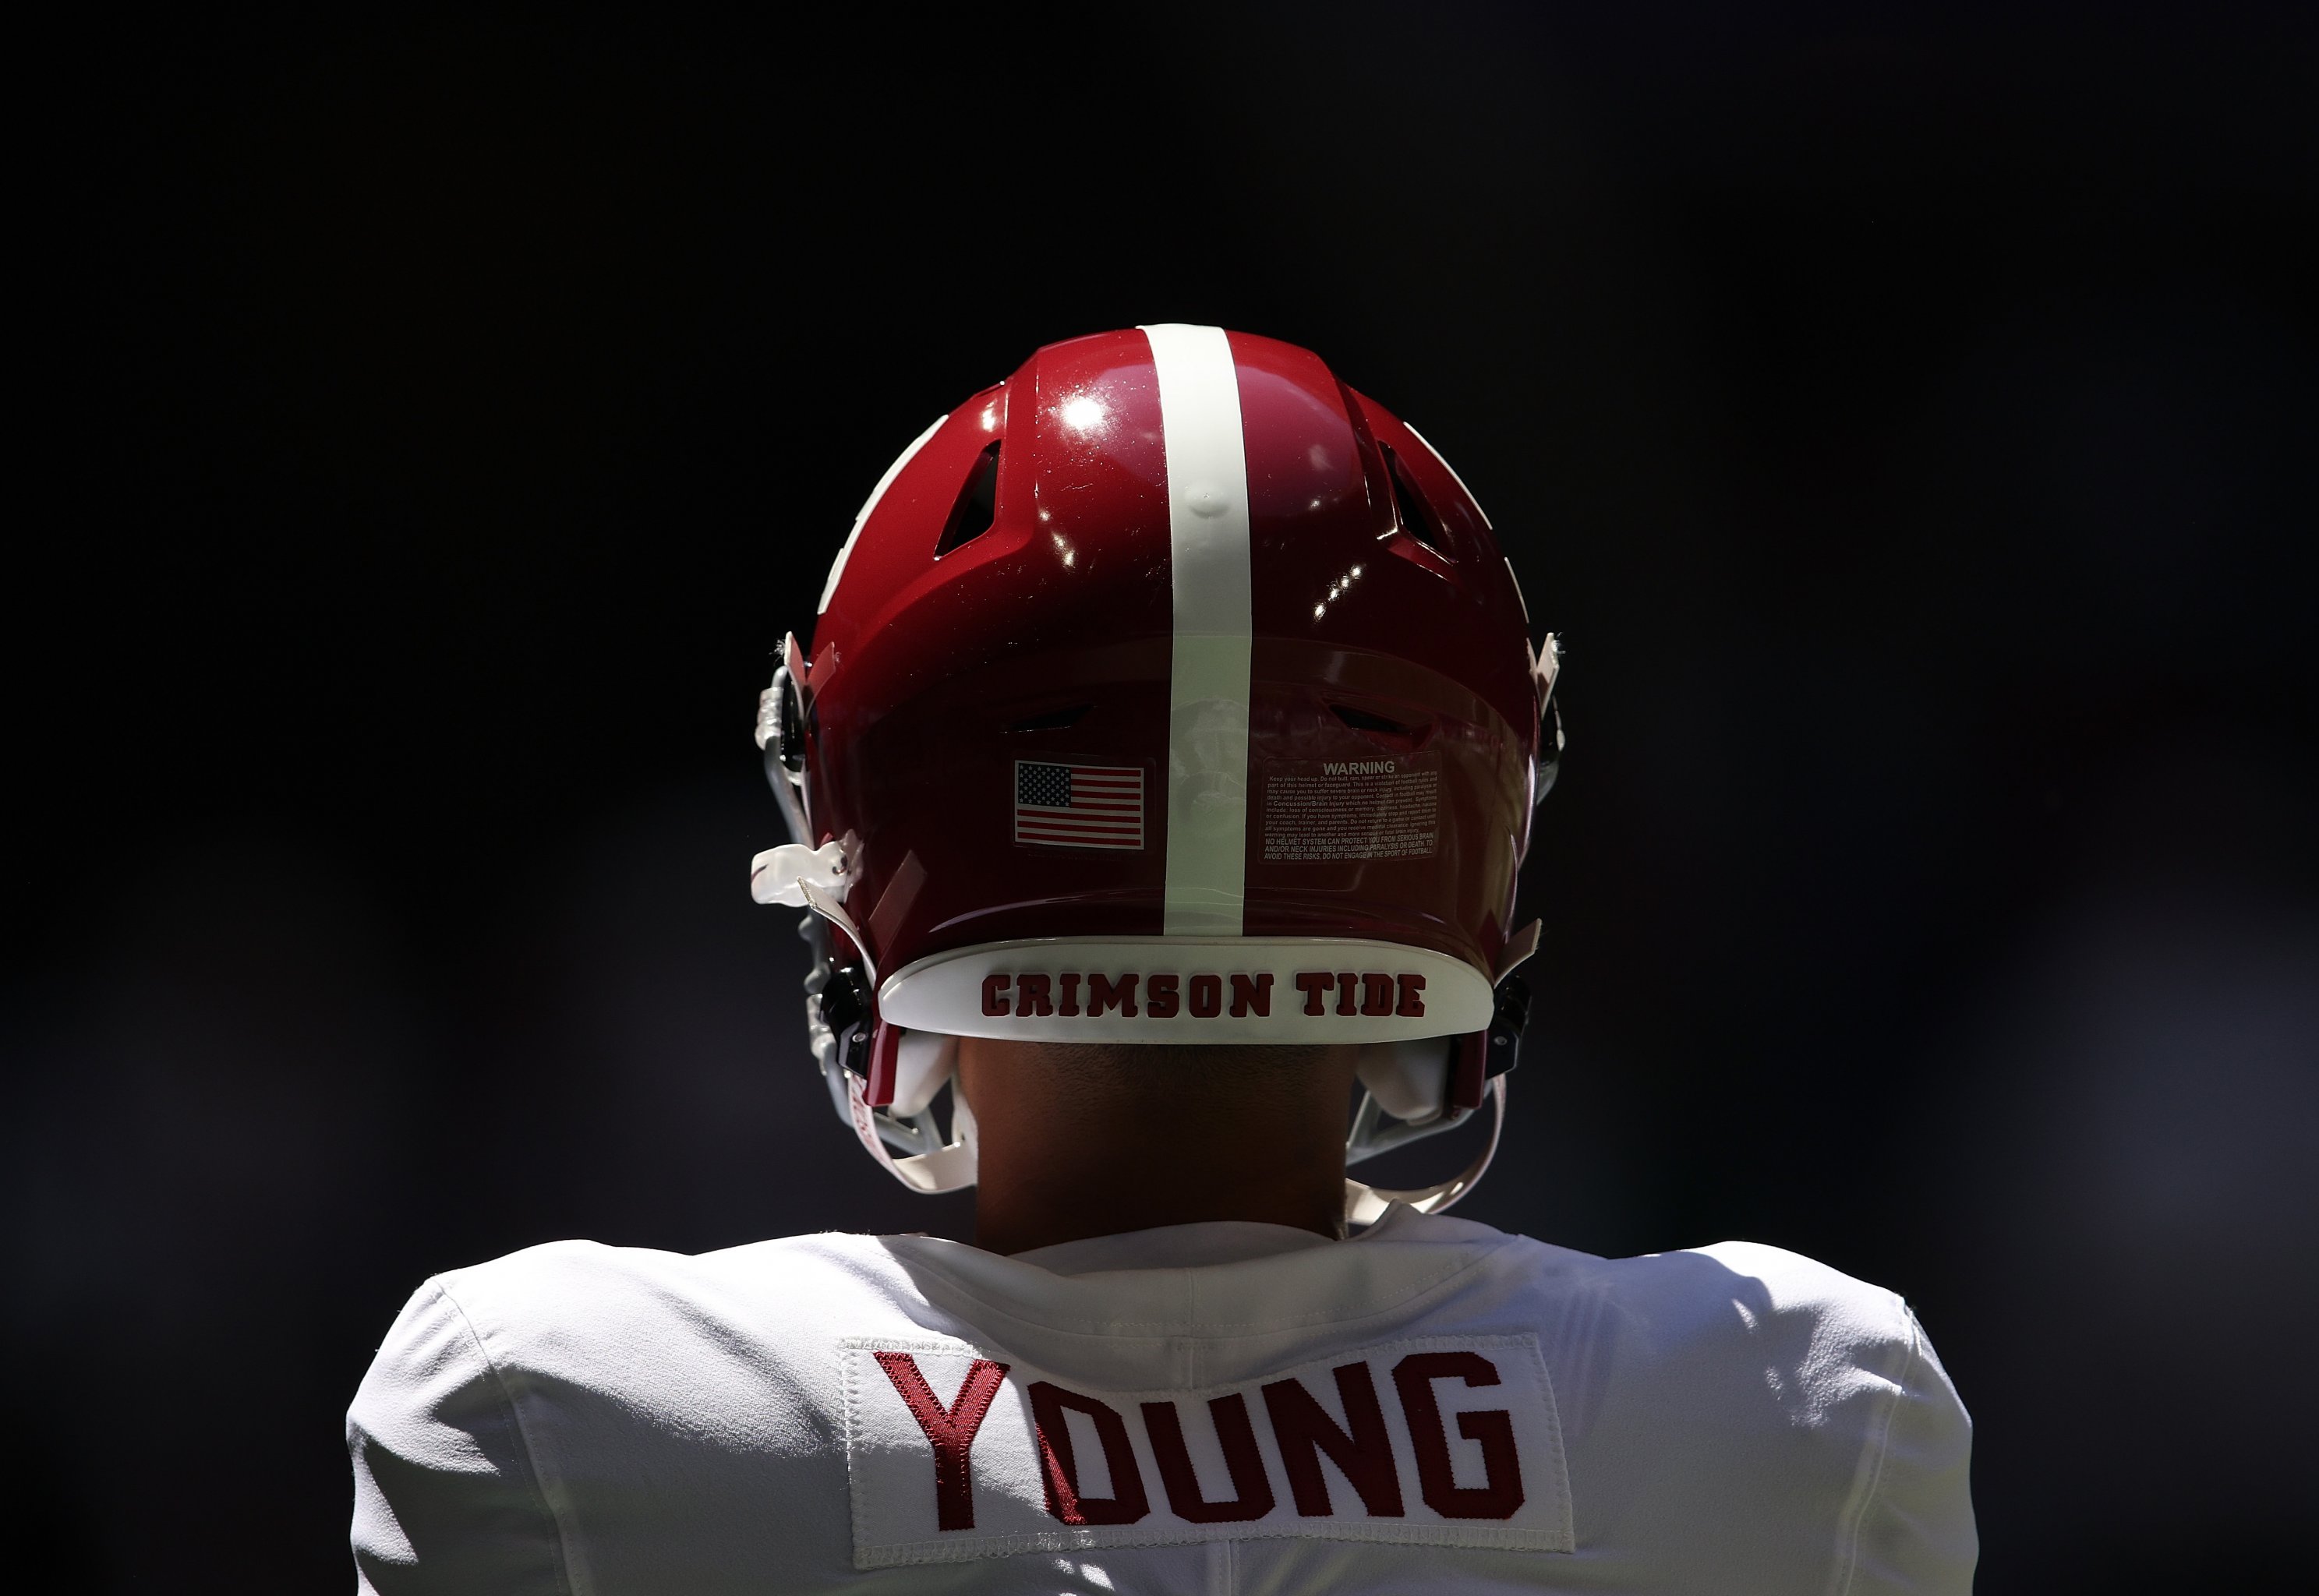 Bryce Young has all the talent to rise to the occasion for Alabama